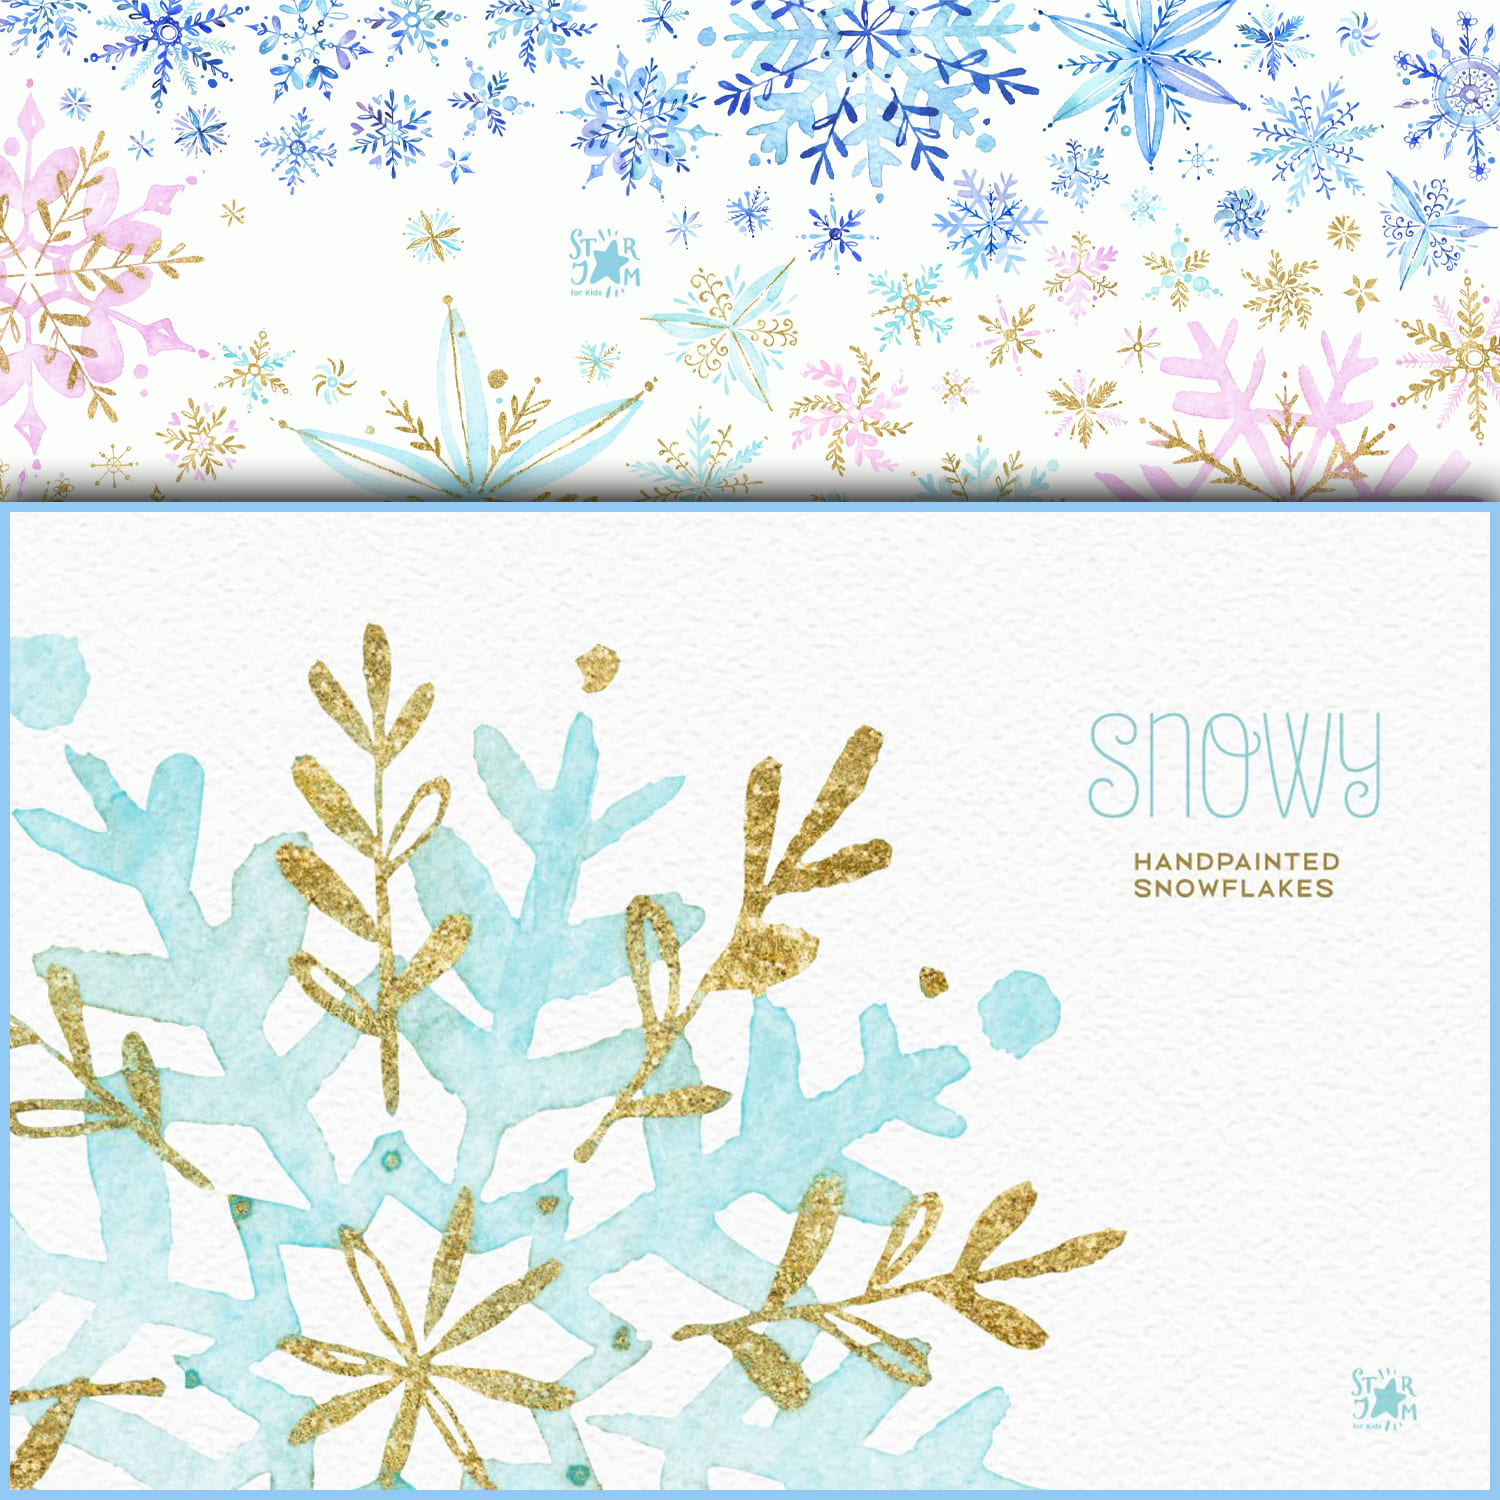 Snowy. Holidays Snowflakes Cover.